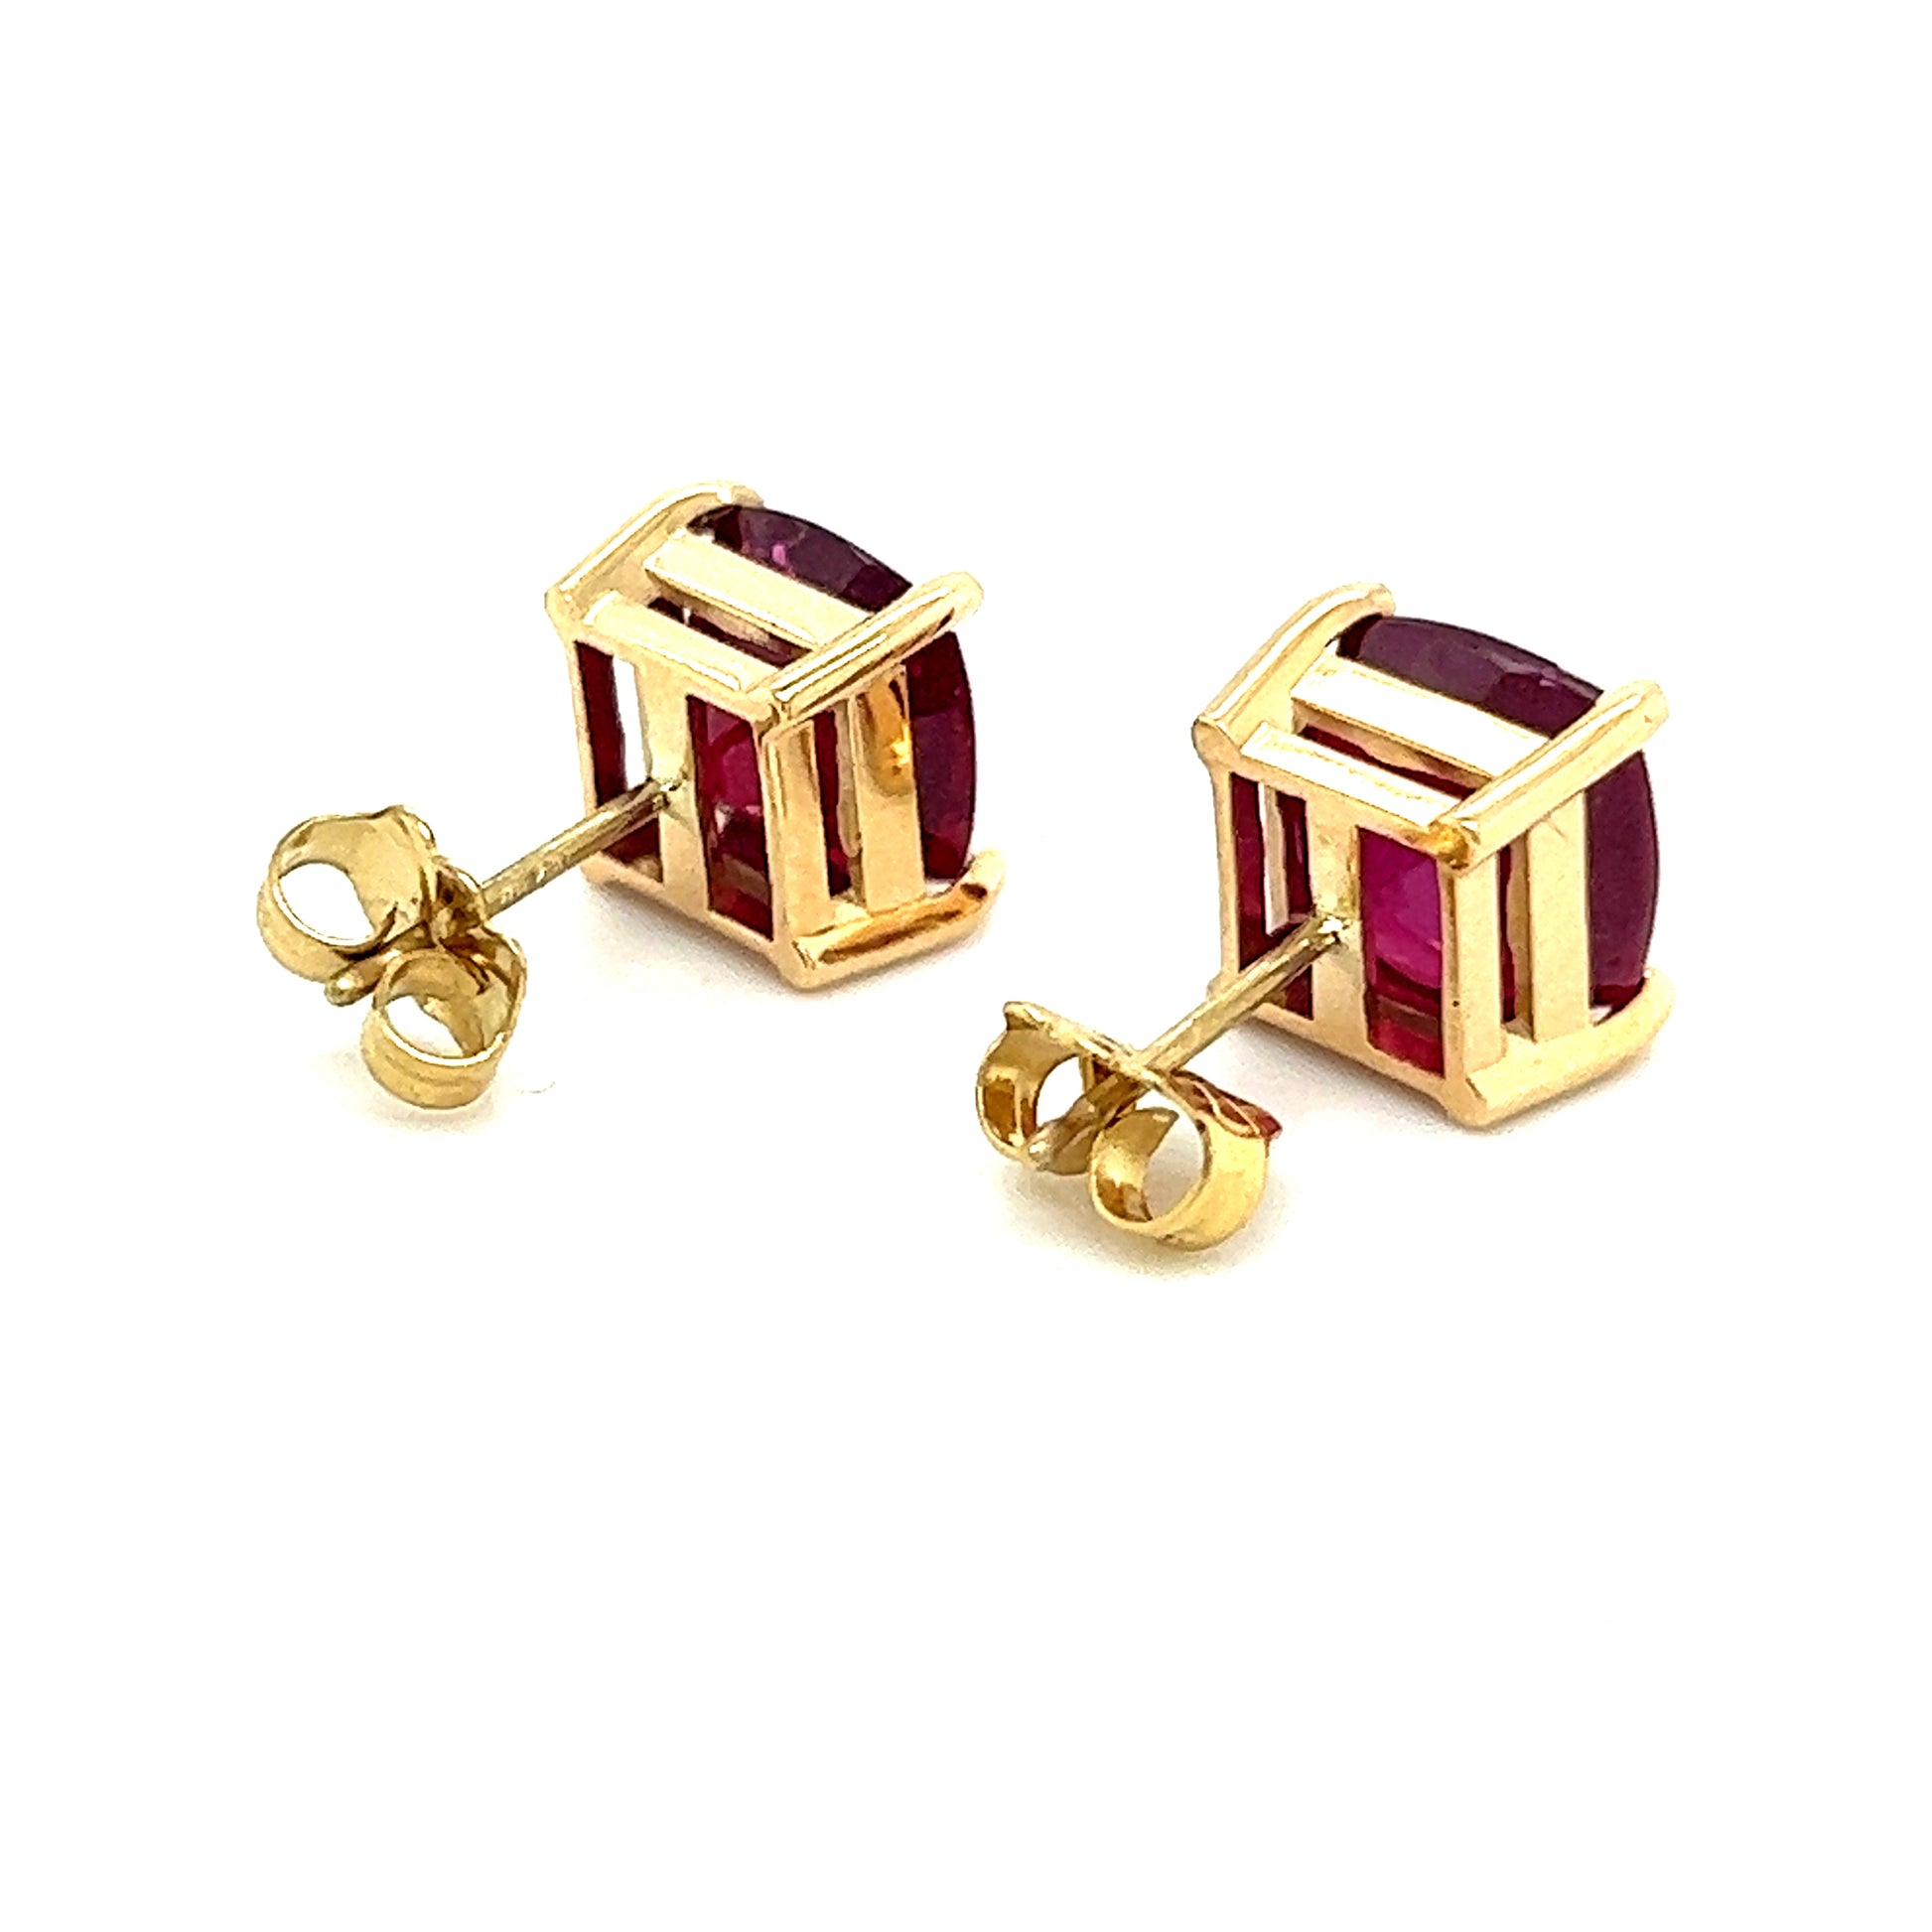 Natural Ruby Stud Earrings 14k Yellow Gold 4.18 TW Certified $799 307909